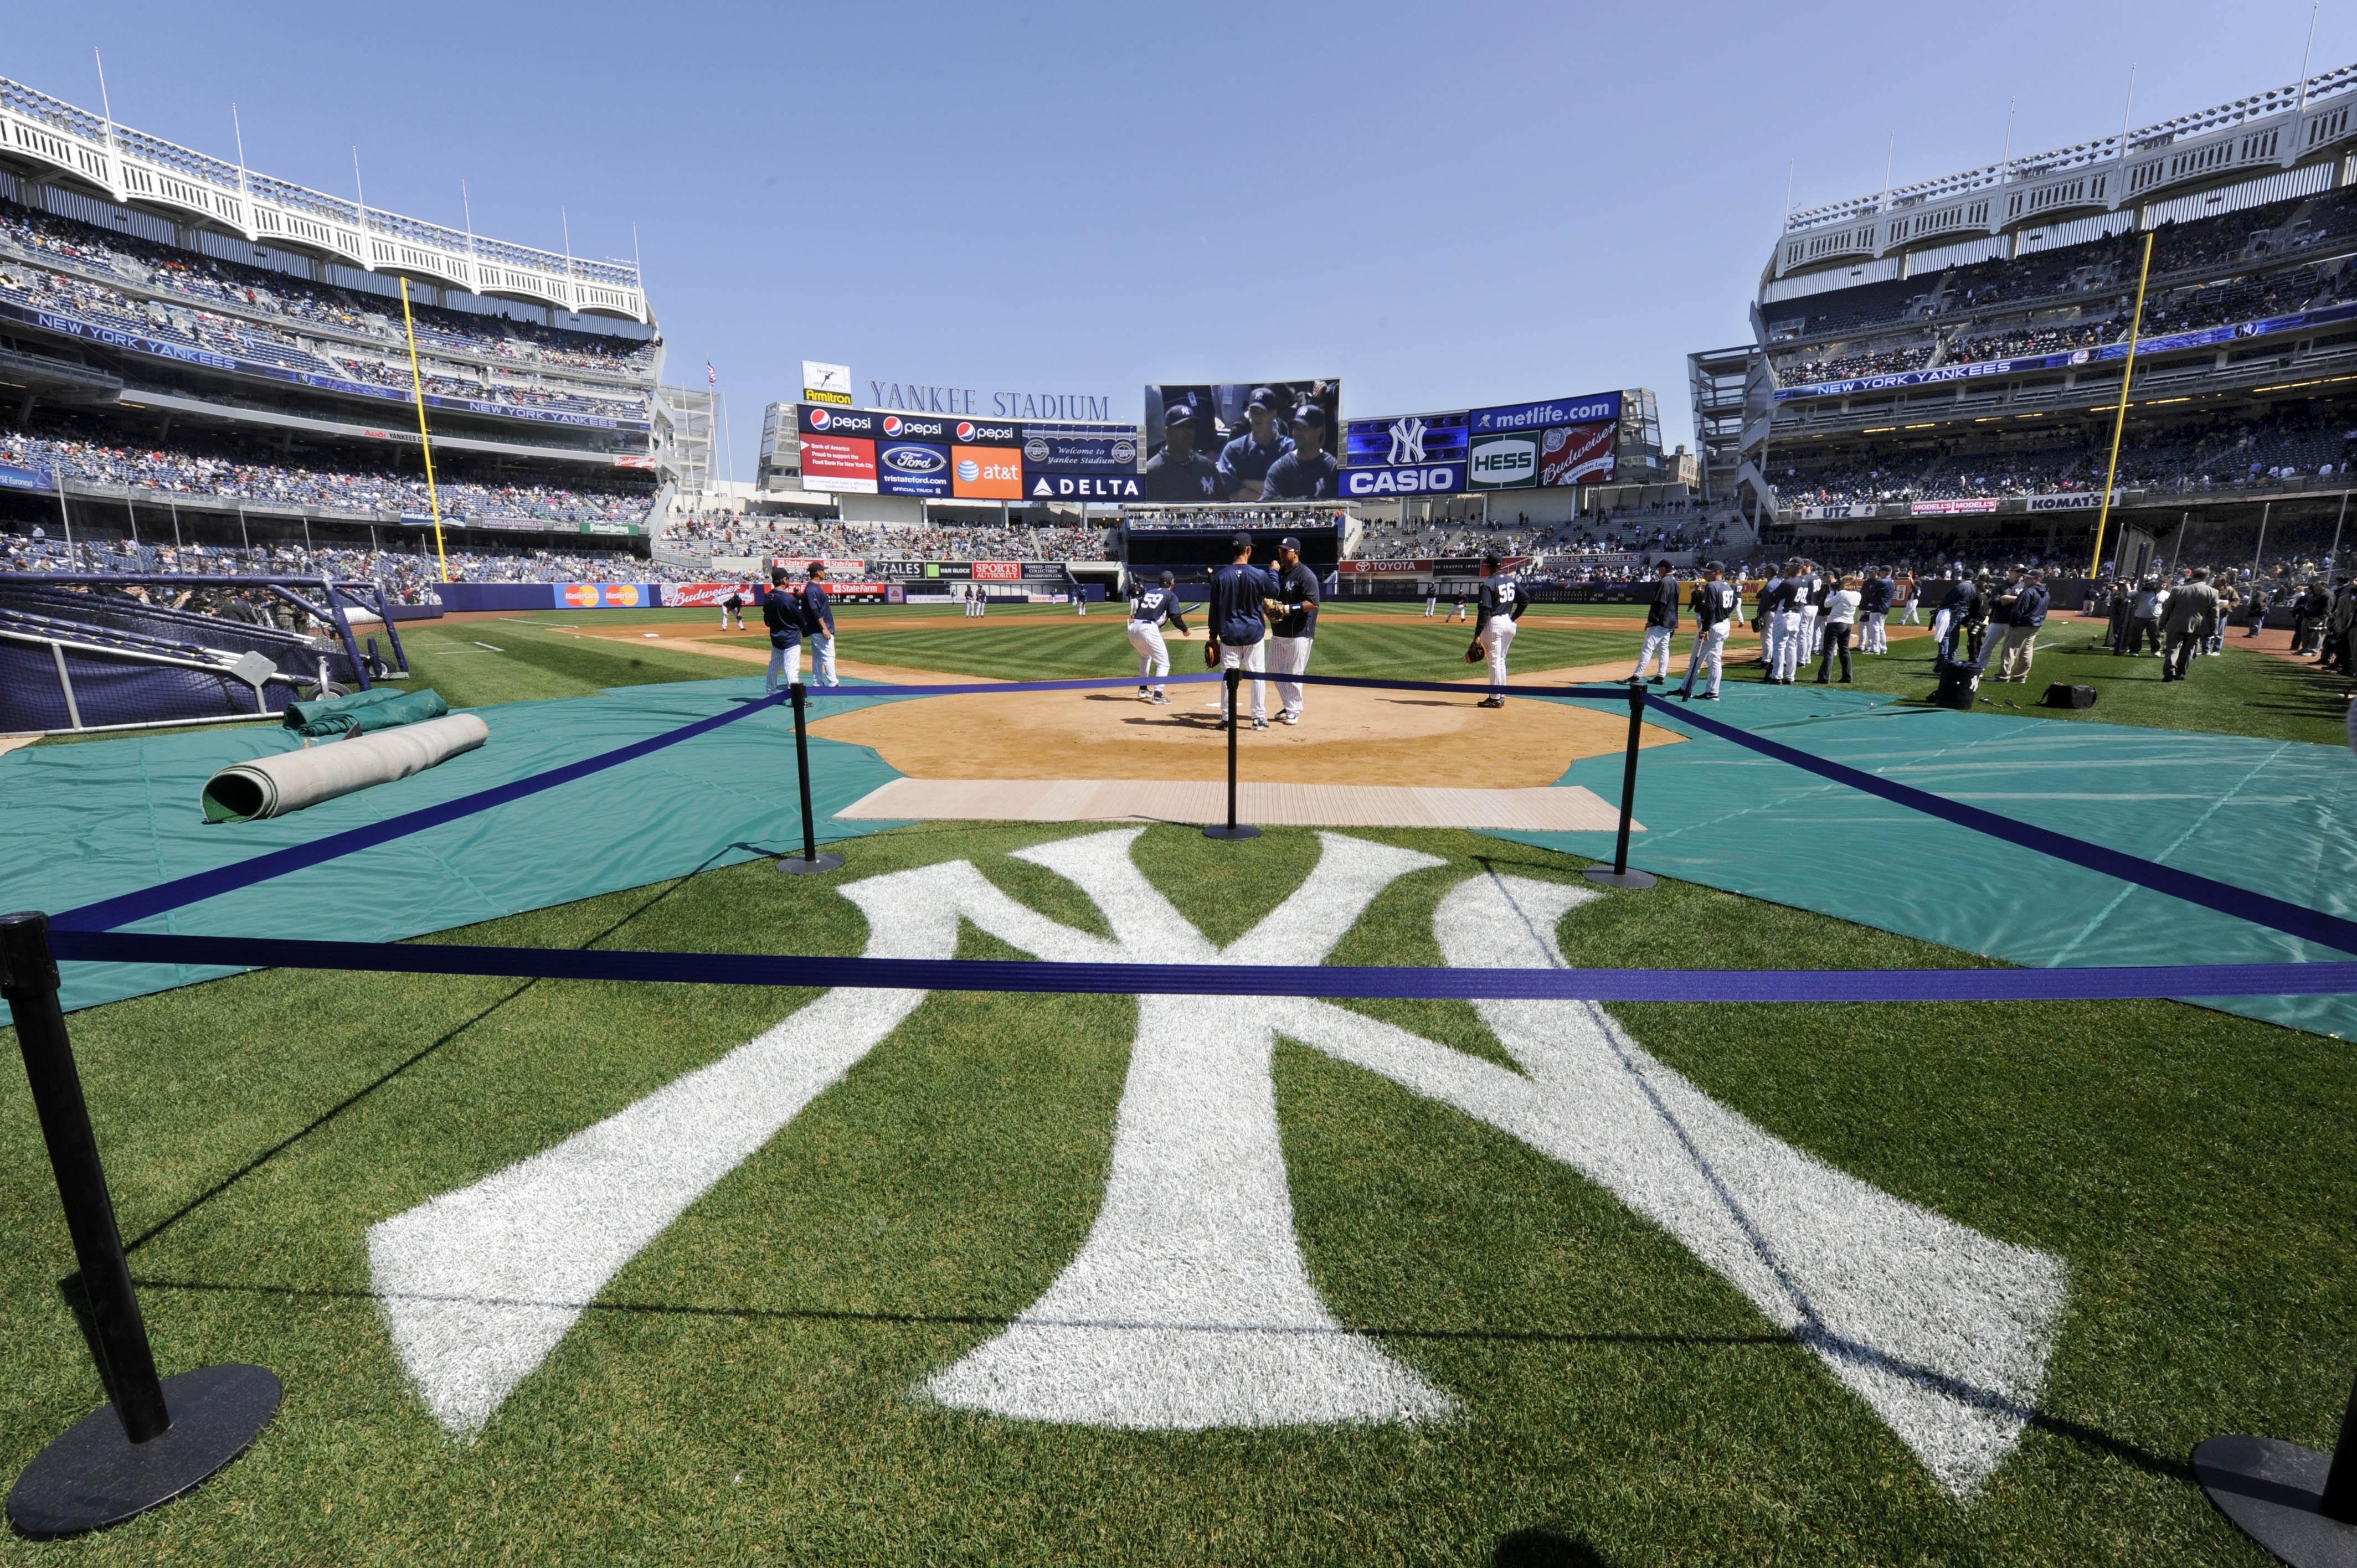 The traditional logo is painted on the grass as the New York Yankees workout in New York